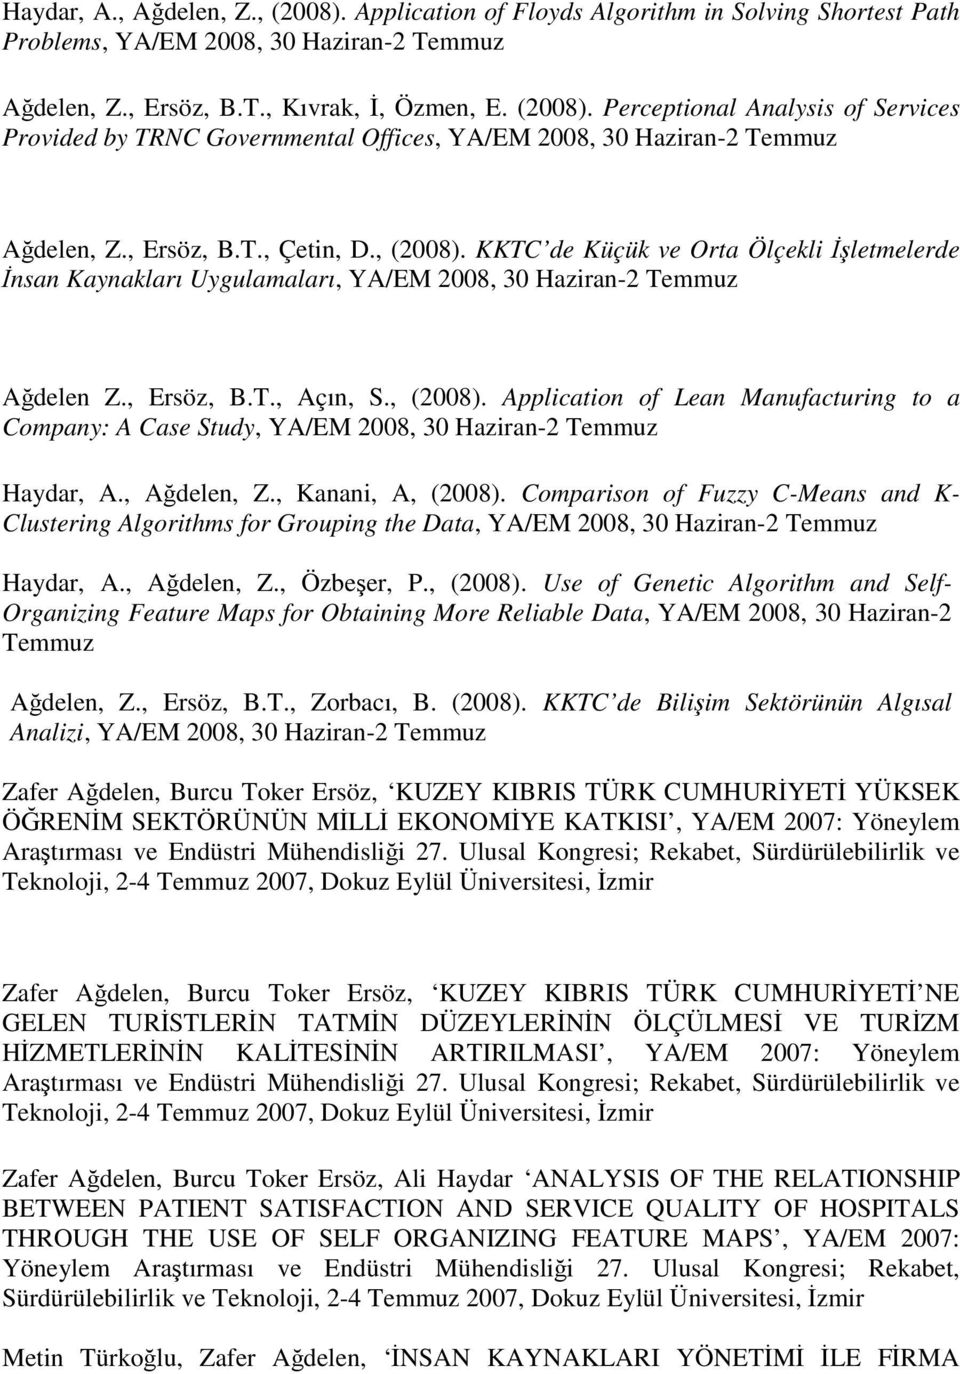 , Ağdelen, Z., Kanani, A, (2008). Comparison of Fuzzy C-Means and K- Clustering Algorithms for Grouping the Data, YA/EM 2008, 30 Haziran-2 Temmuz Haydar, A., Ağdelen, Z., Özbeşer, P., (2008). Use of Genetic Algorithm and Self- Organizing Feature Maps for Obtaining More Reliable Data, YA/EM 2008, 30 Haziran-2 Temmuz Ağdelen, Z.